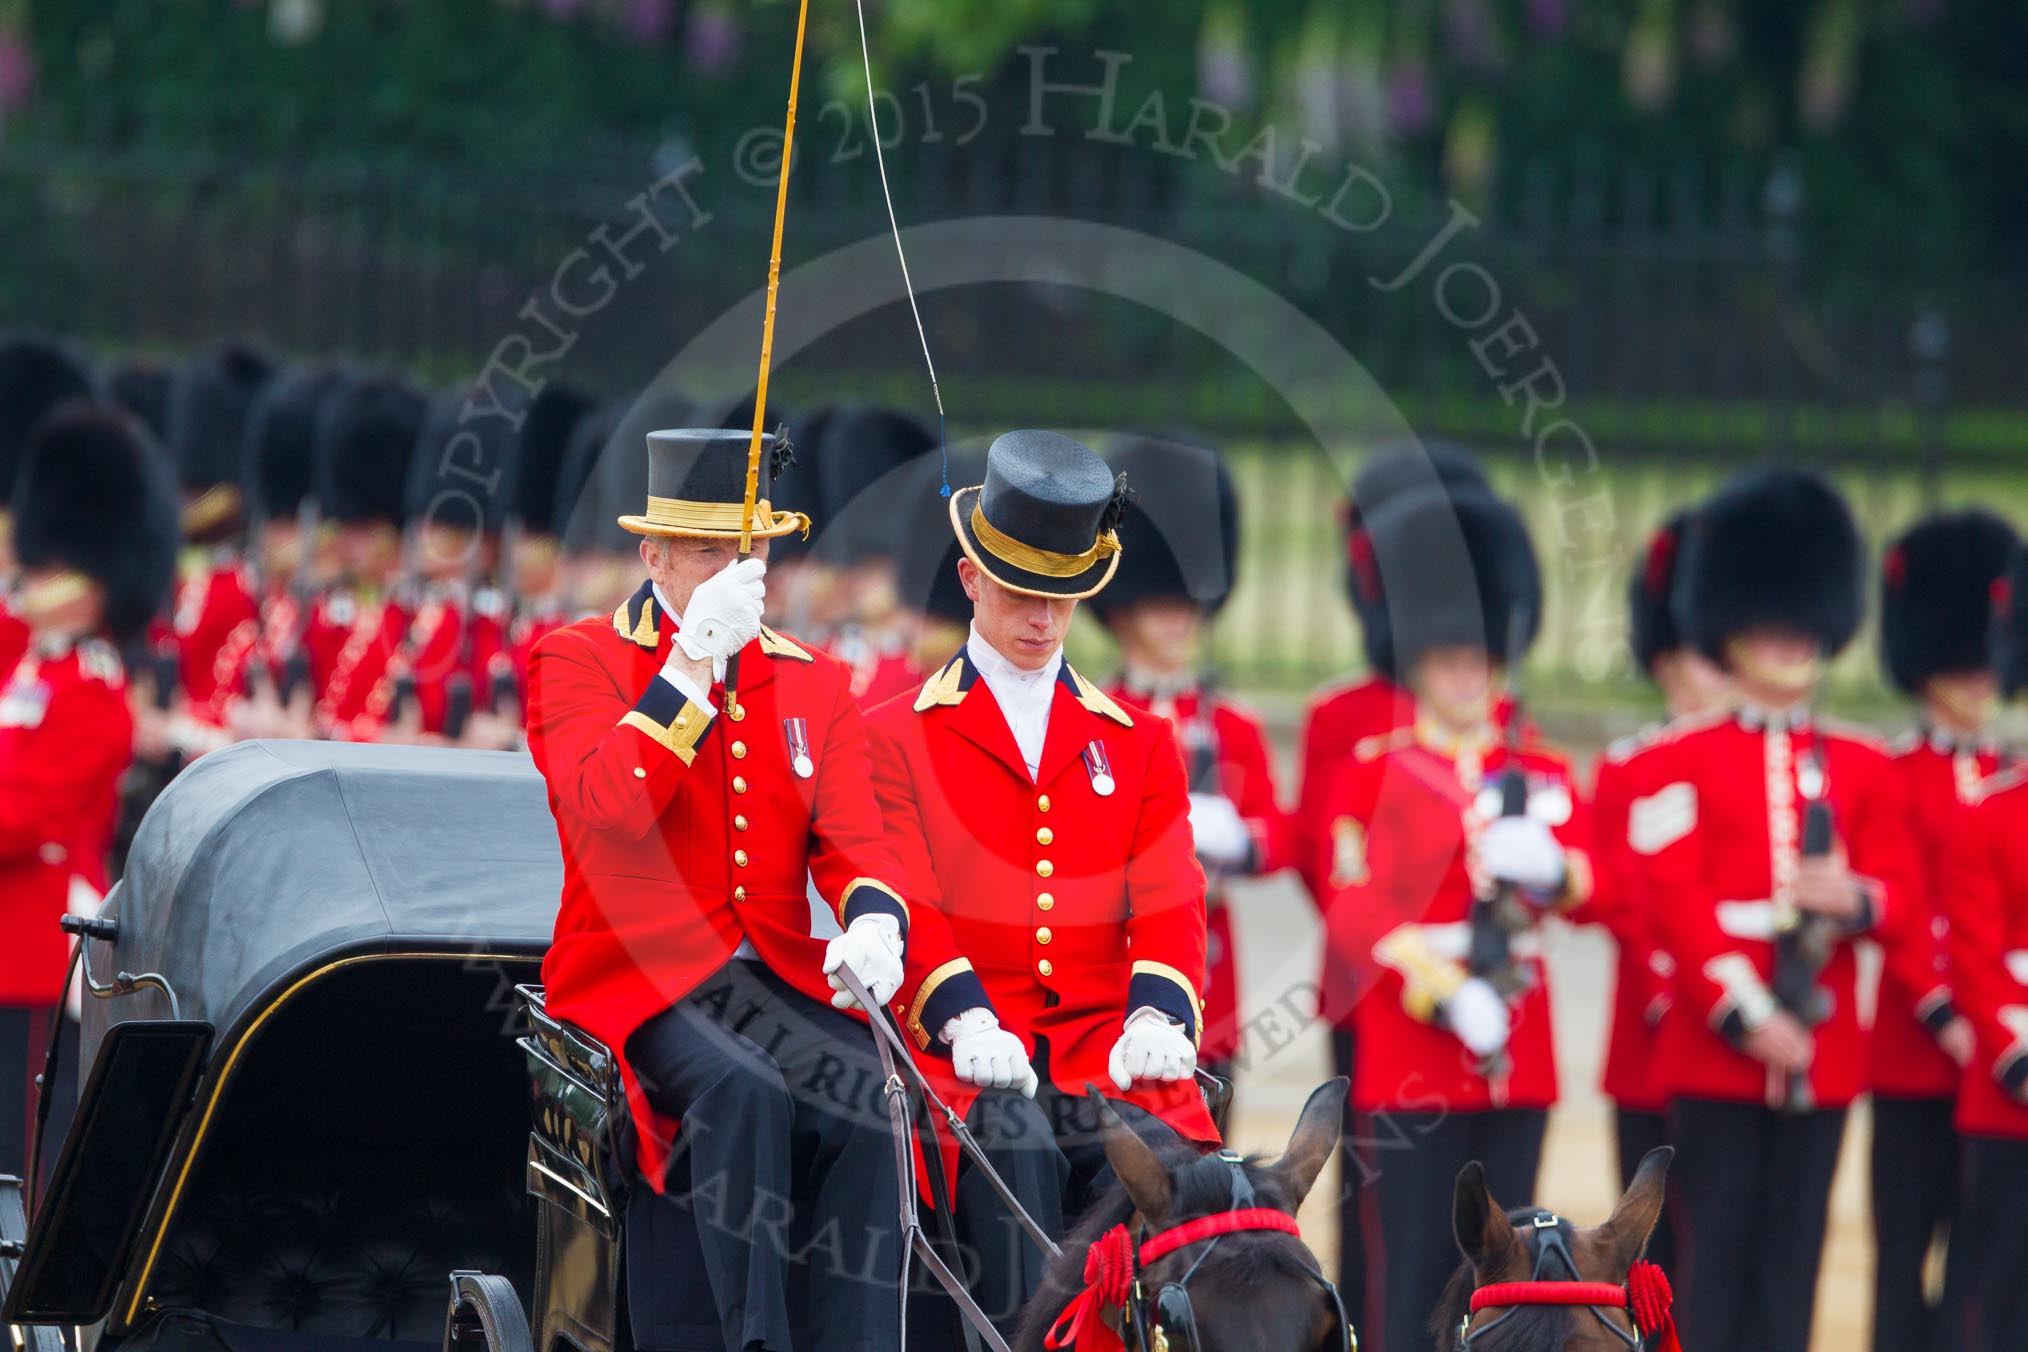 The Colonel's Review 2016.
Horse Guards Parade, Westminster,
London,

United Kingdom,
on 04 June 2016 at 10:51, image #135